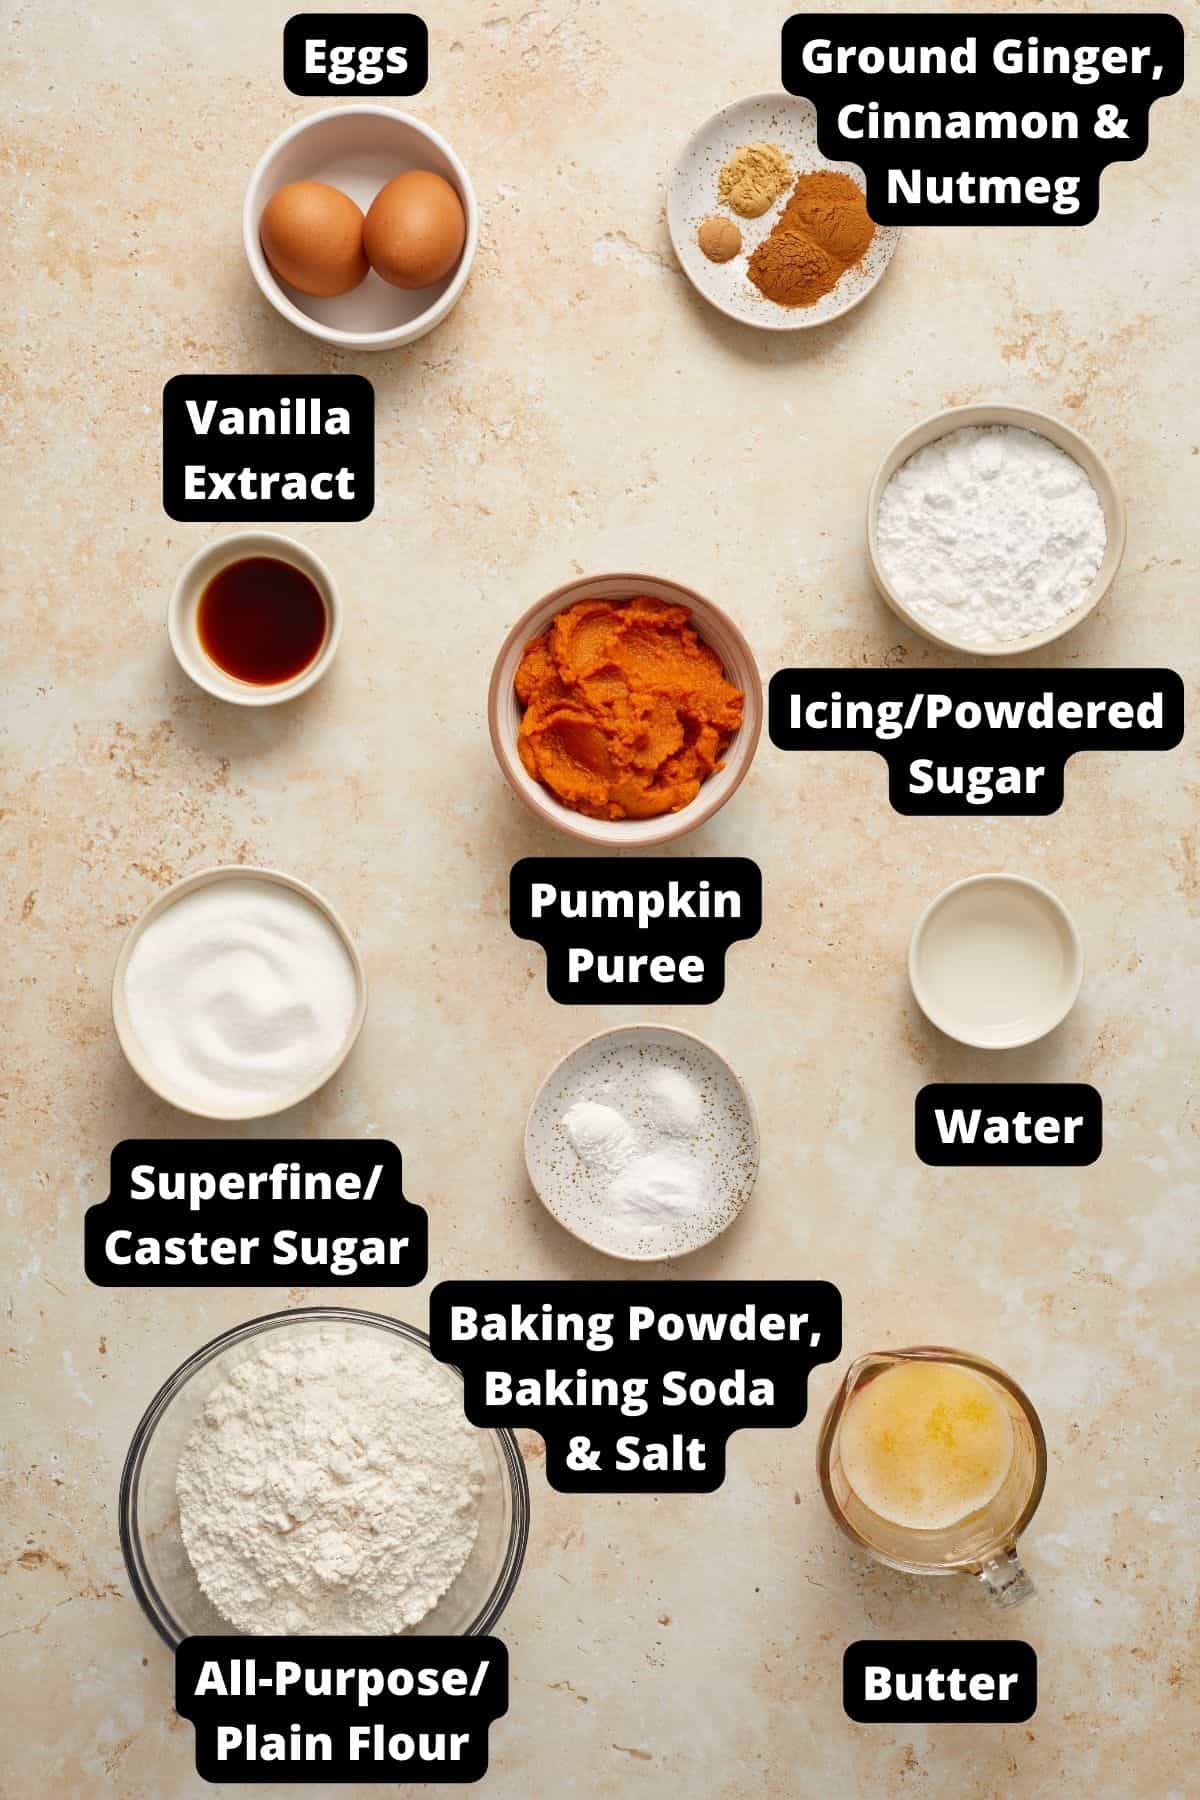 Ingredients in this recipe on a beige and white marble background.